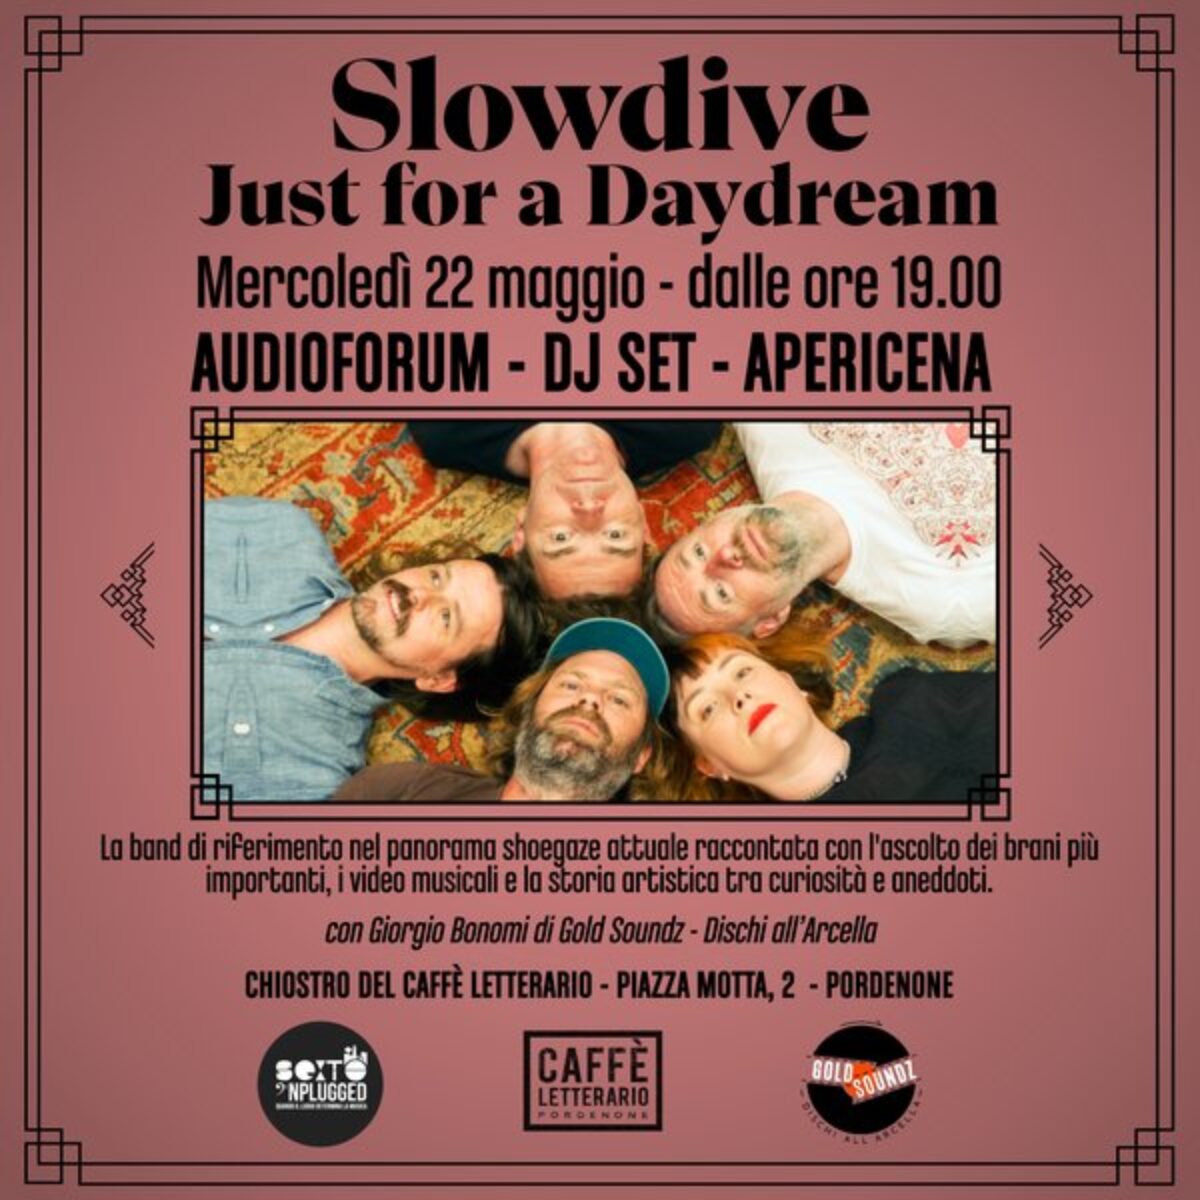 Slowdive – Just for a Daydream